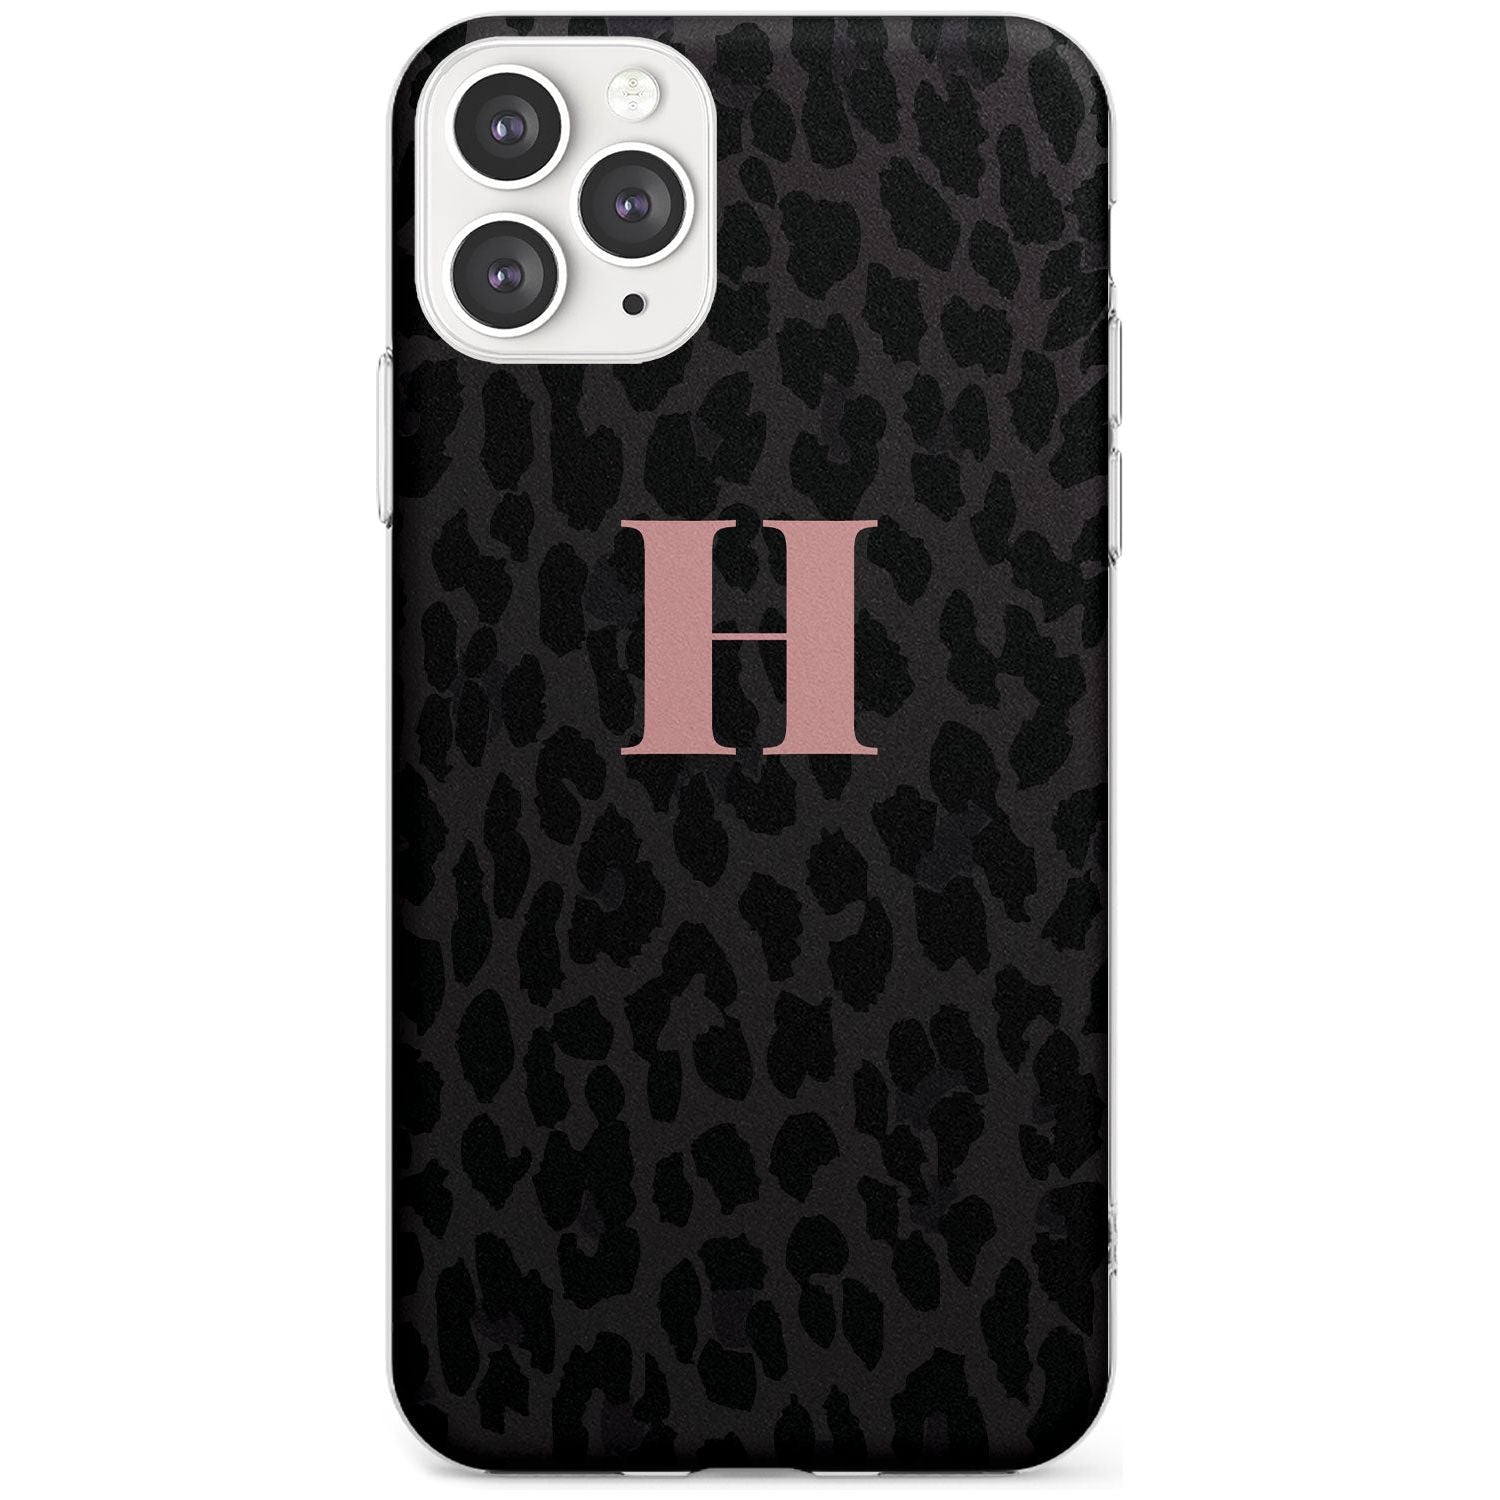 Small Pink Leopard Monogram Slim TPU Phone Case for iPhone 11 Pro Max